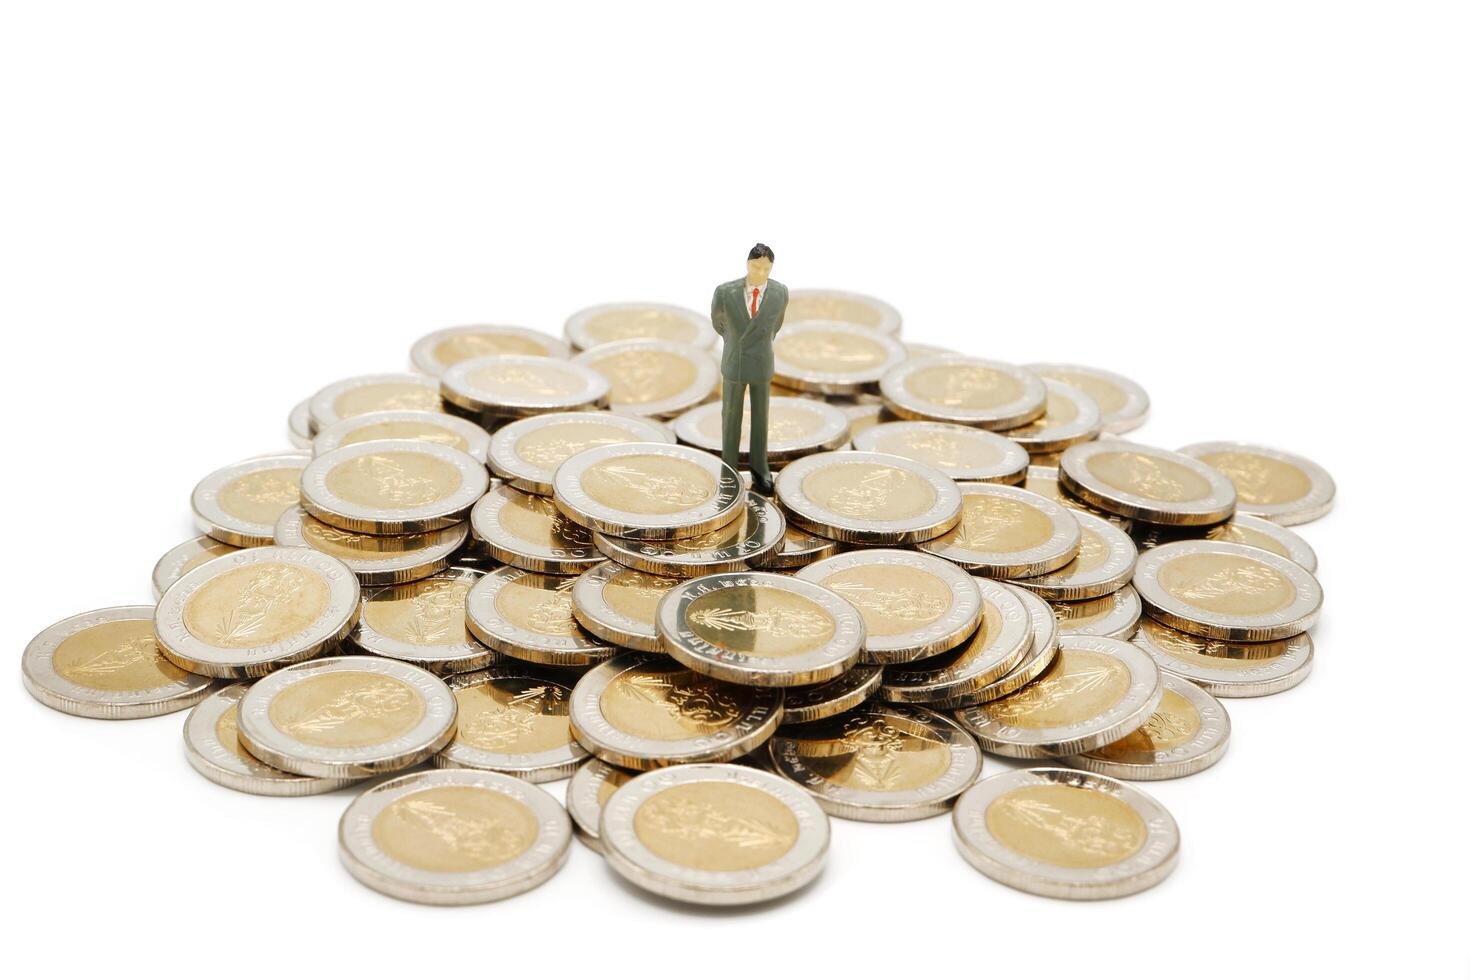 Miniature businessman standing on pile of new 10 Thai Baht coins, isolated on white background. Business concept. photo